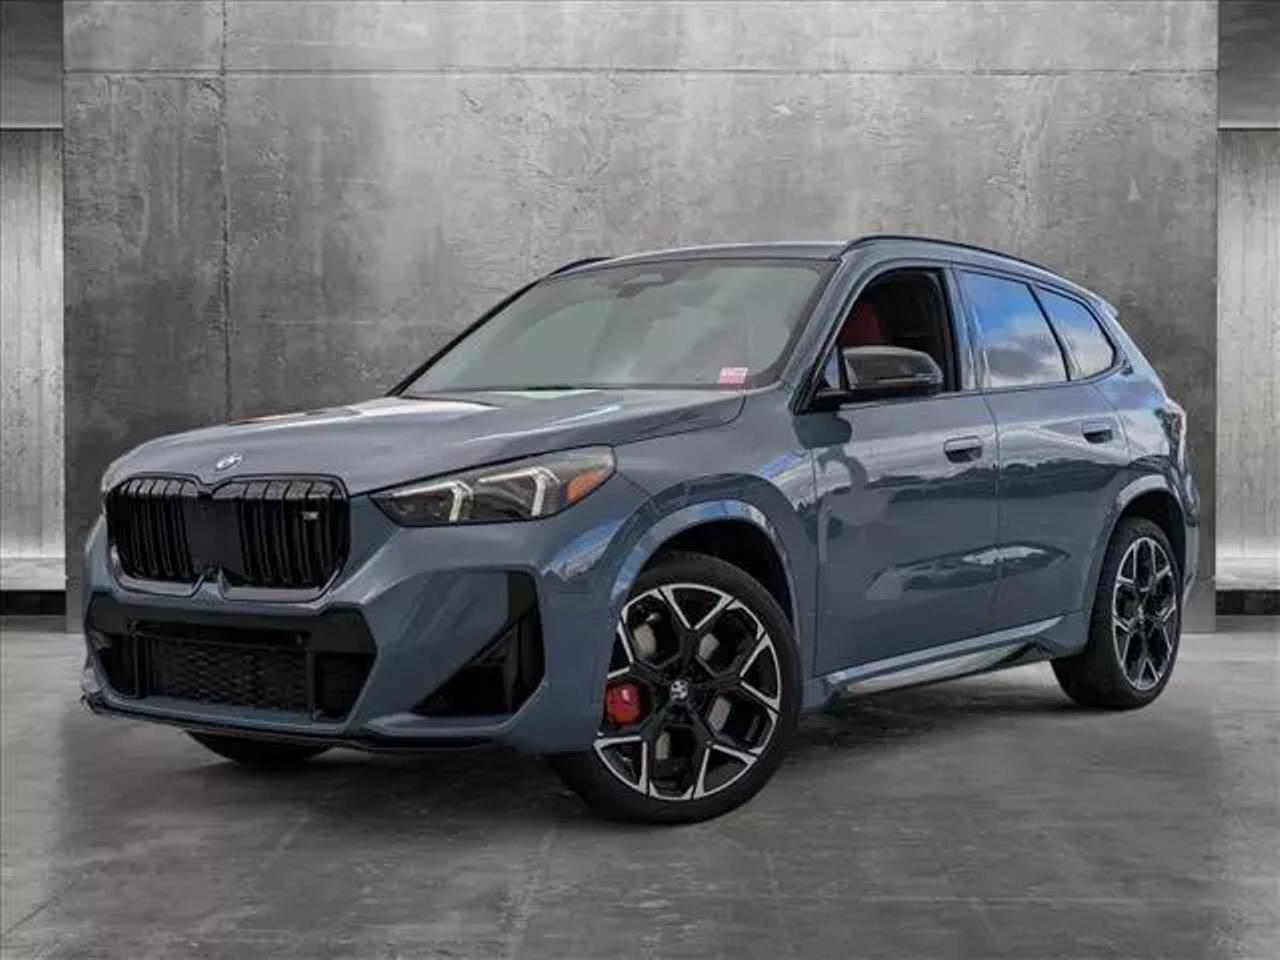 BMW X1 M35i: 296bhp M lite SUV with all the trimmings